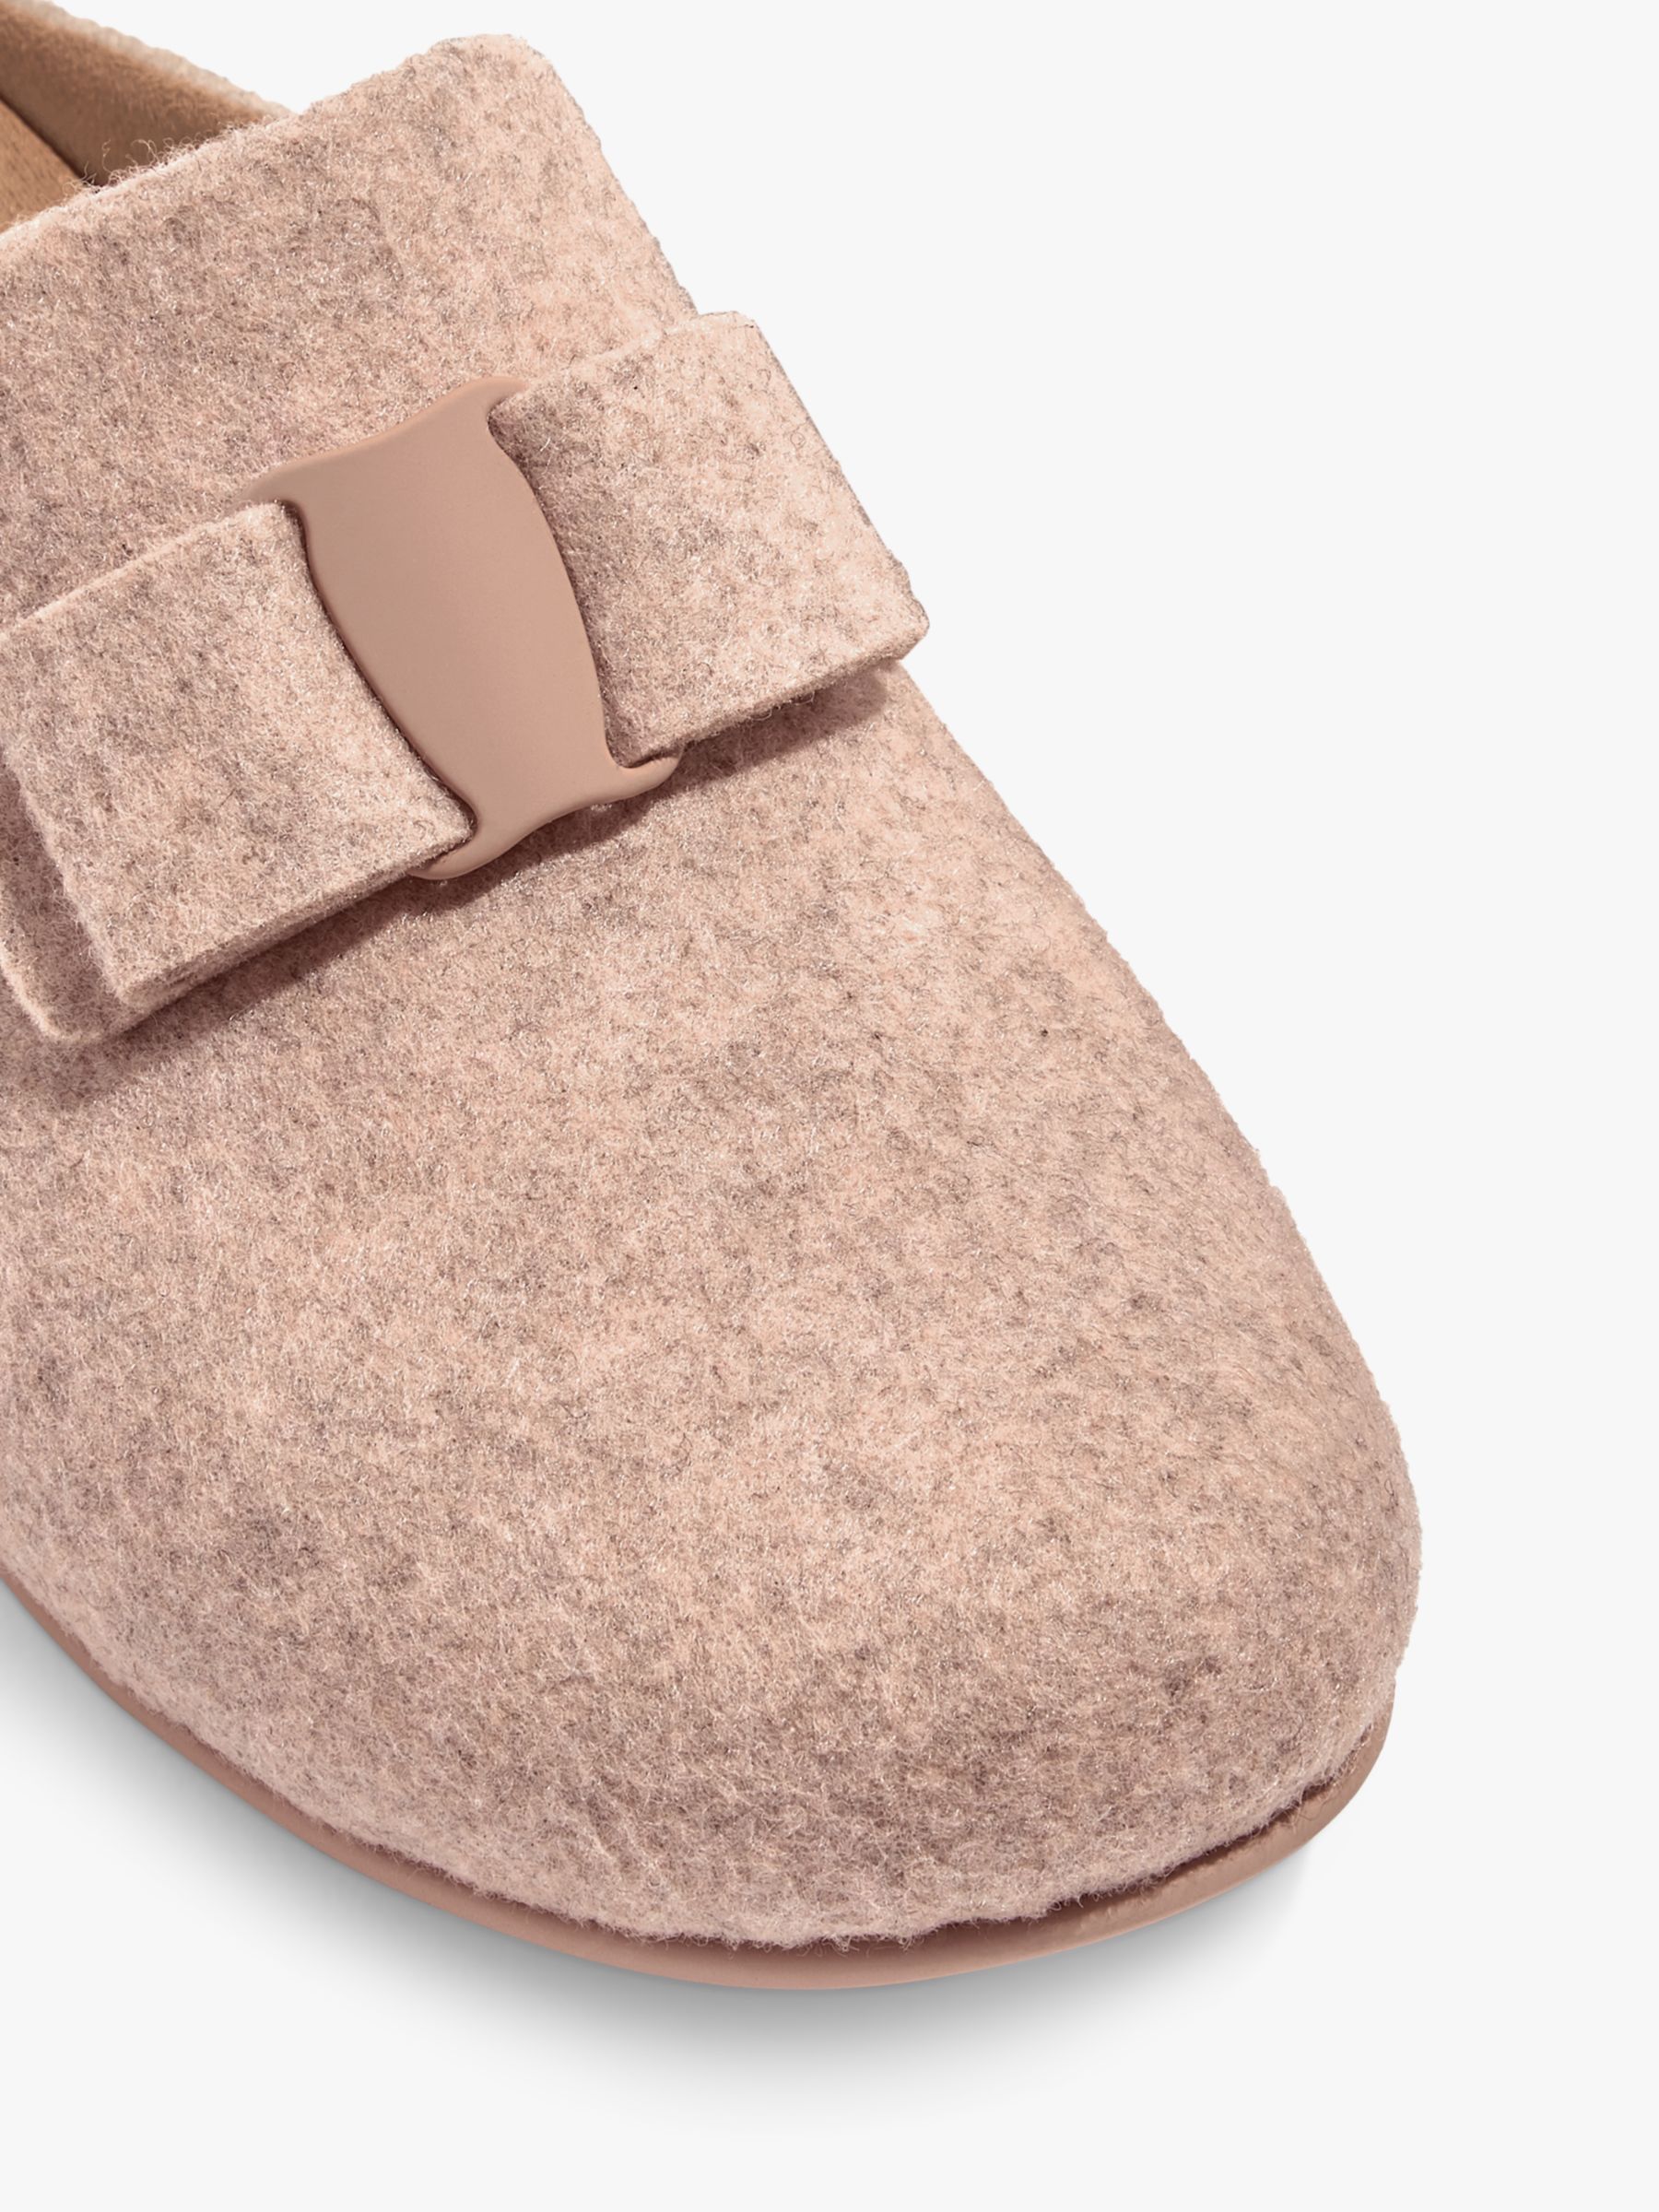 Buy FitFlop Bow Mule Slippers Online at johnlewis.com